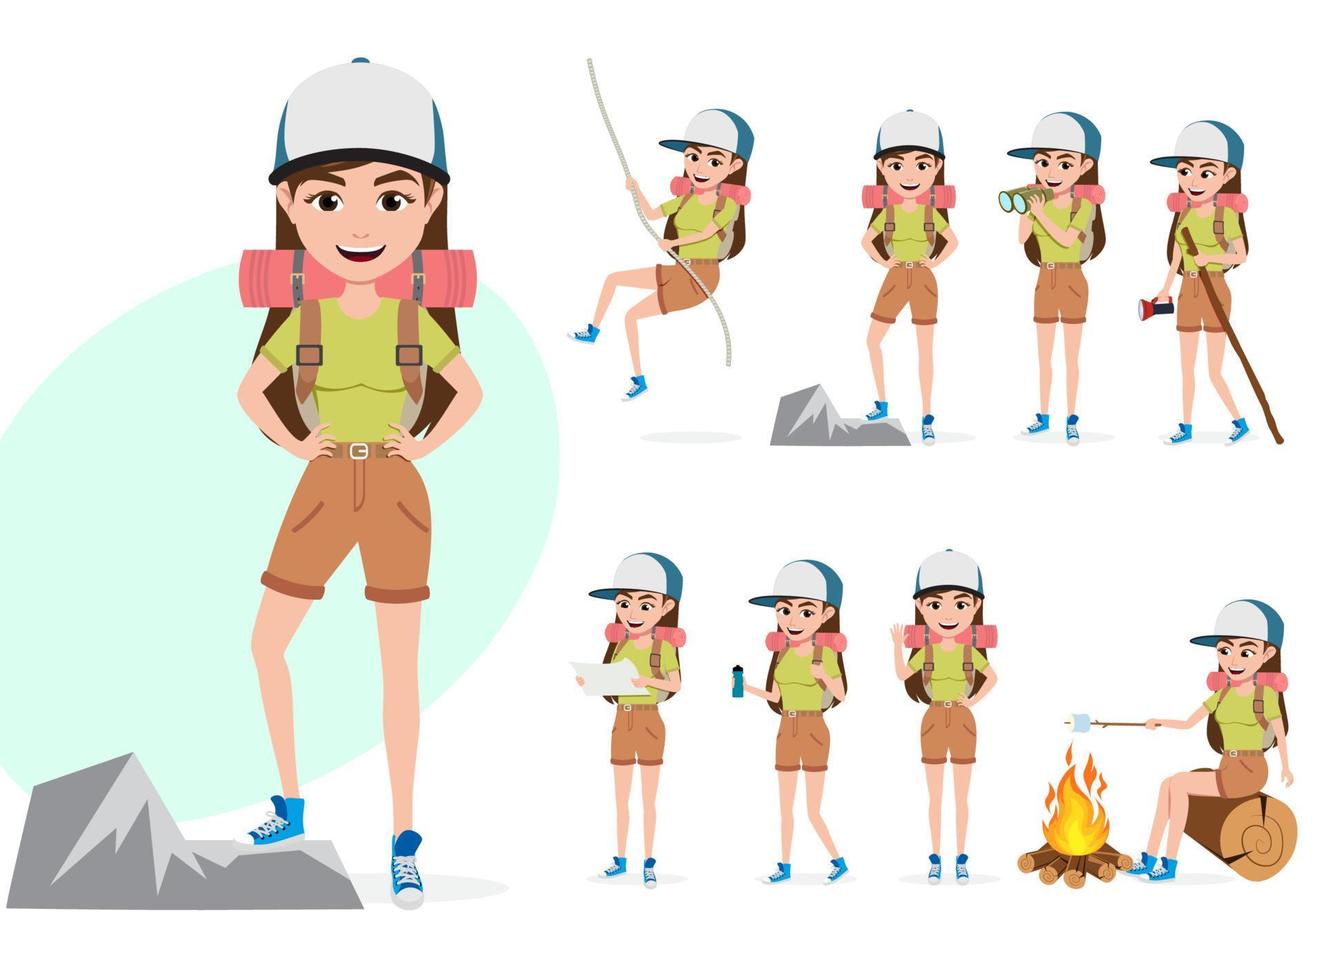 Female mountain climber vector character set. Woman hiker character in different summer hiking activities and standing poses like rope climbing, telescoping, walking and cooking.